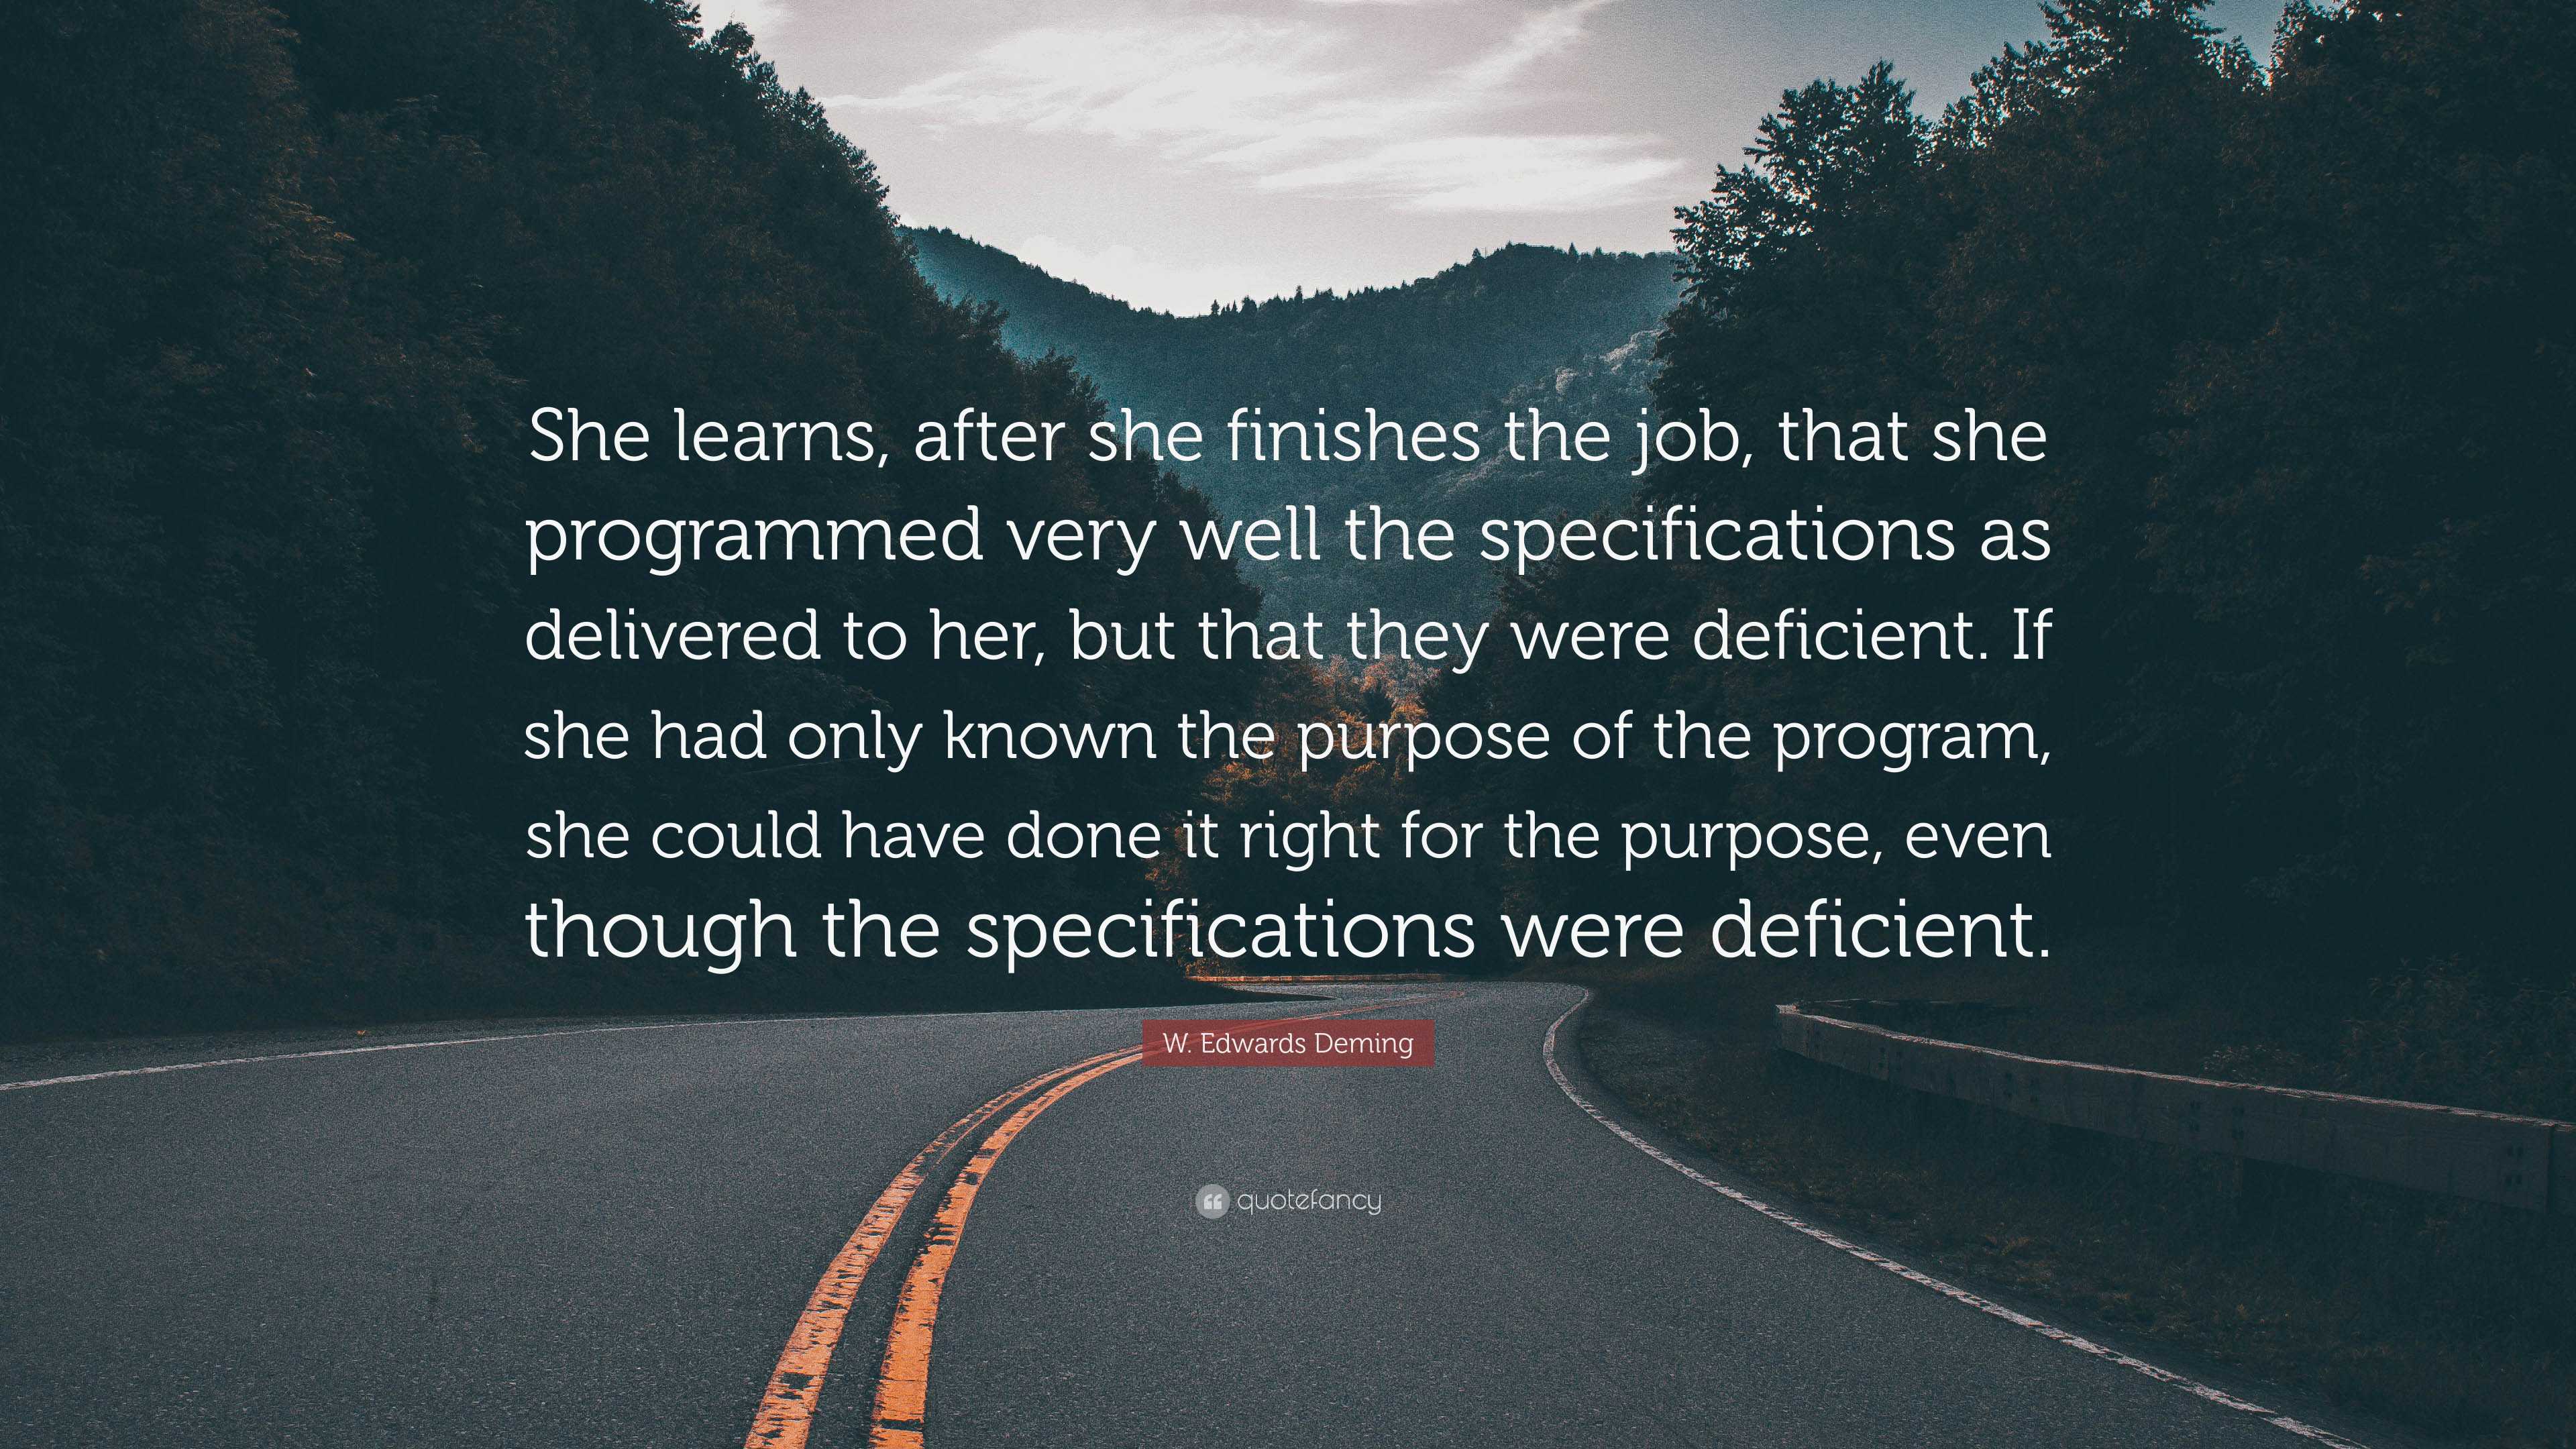 W. Edwards Deming Quote: “She learns, after she finishes the job, that she  programmed very well the specifications as delivered to her, but that t...”